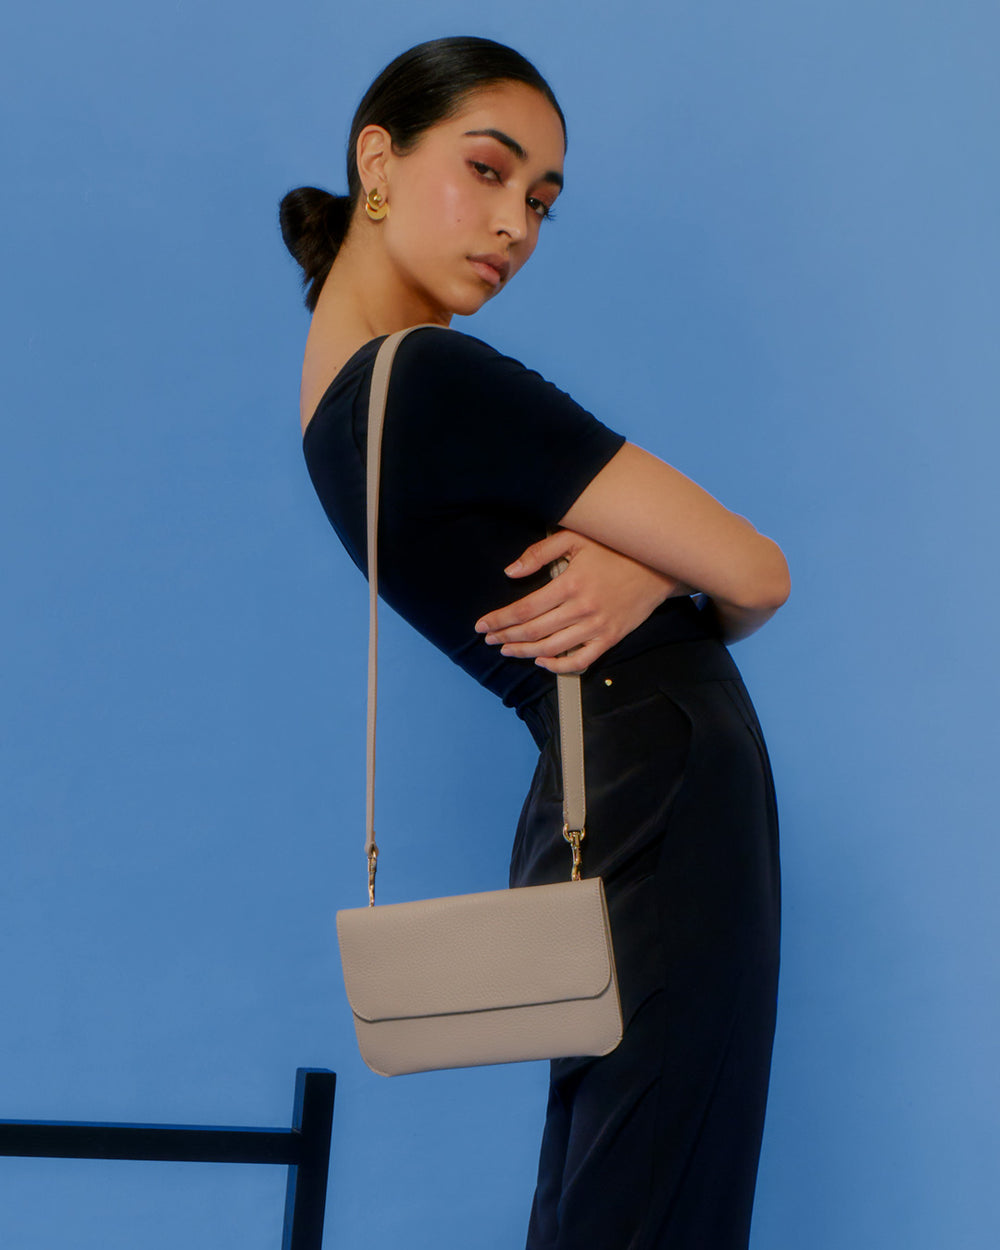 Person posing with a shoulder bag against a plain background.